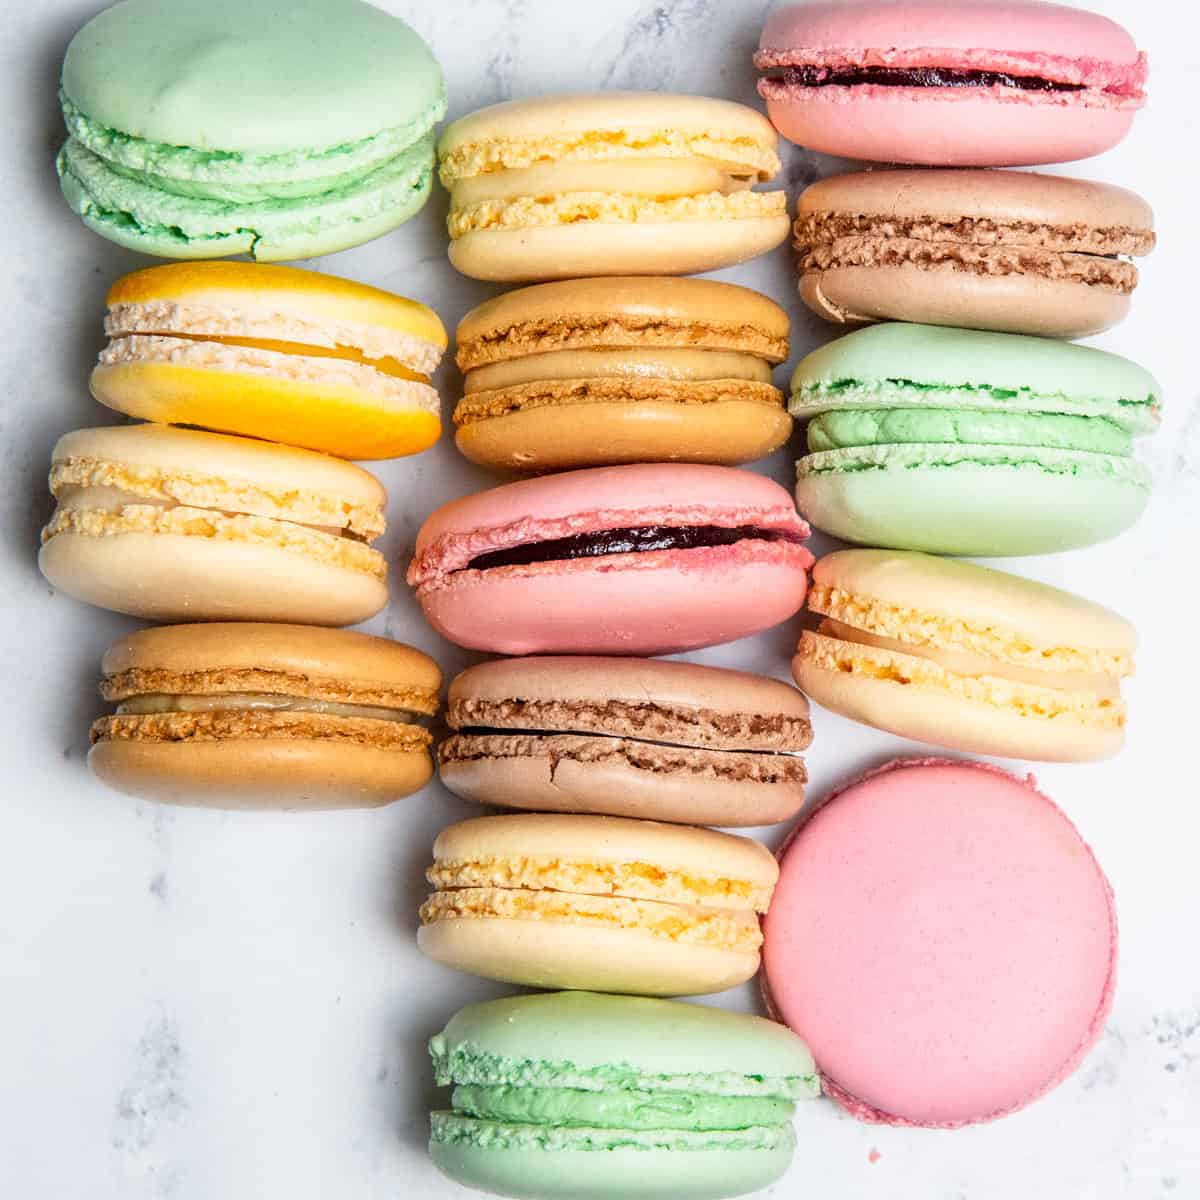 Multicolored macarons placed on a kitchen counter.